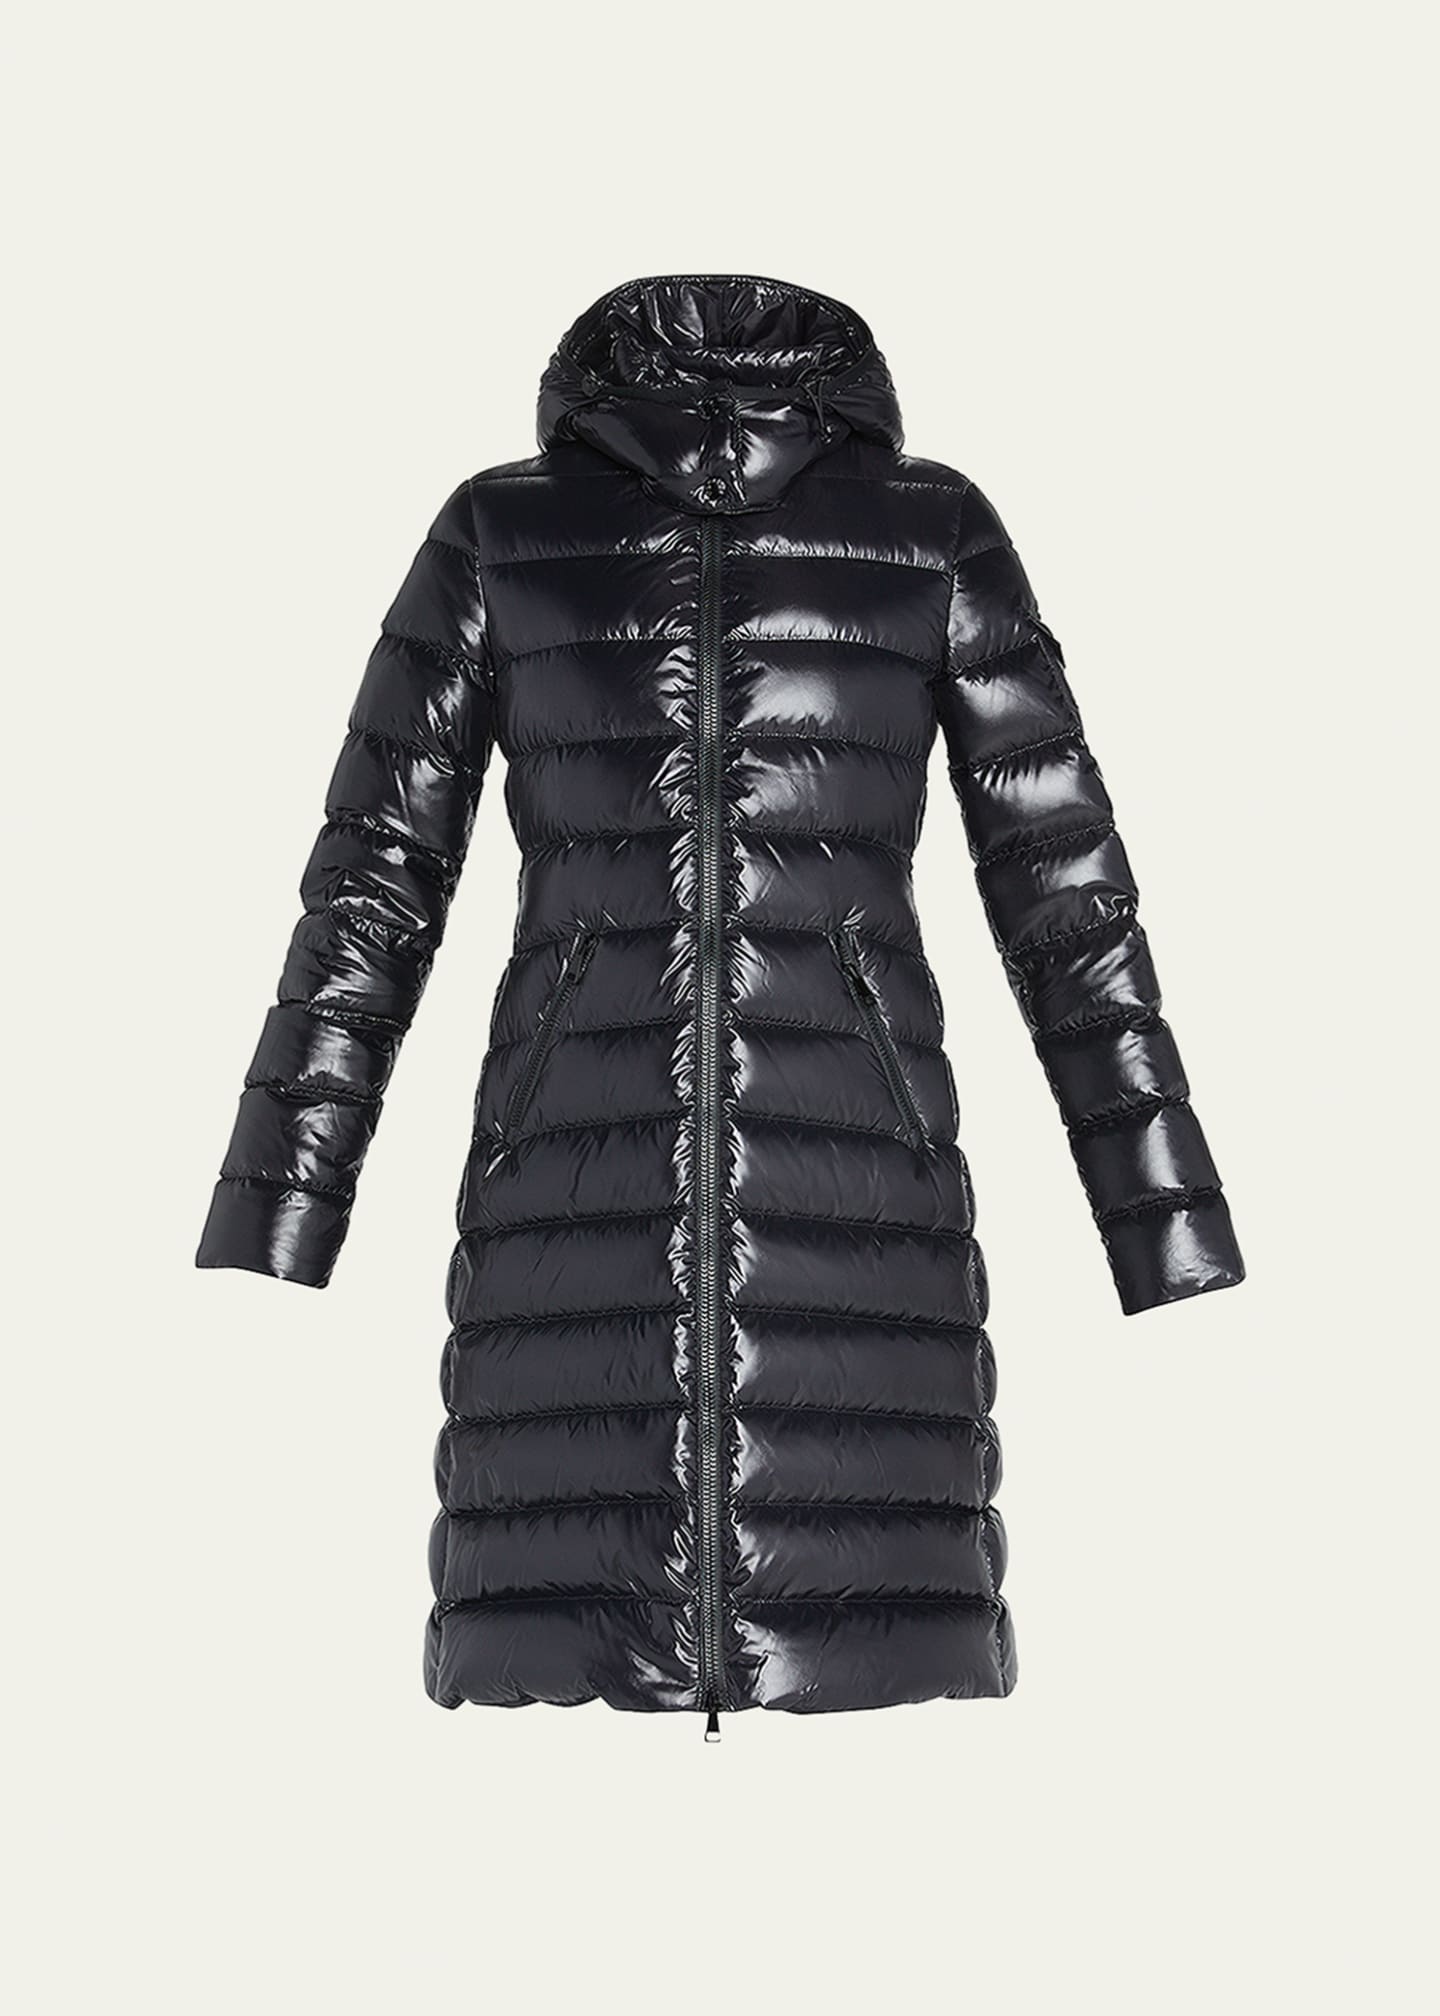 Moncler Moka Shiny Fitted Puffer Coat with Hood - Bergdorf Goodman